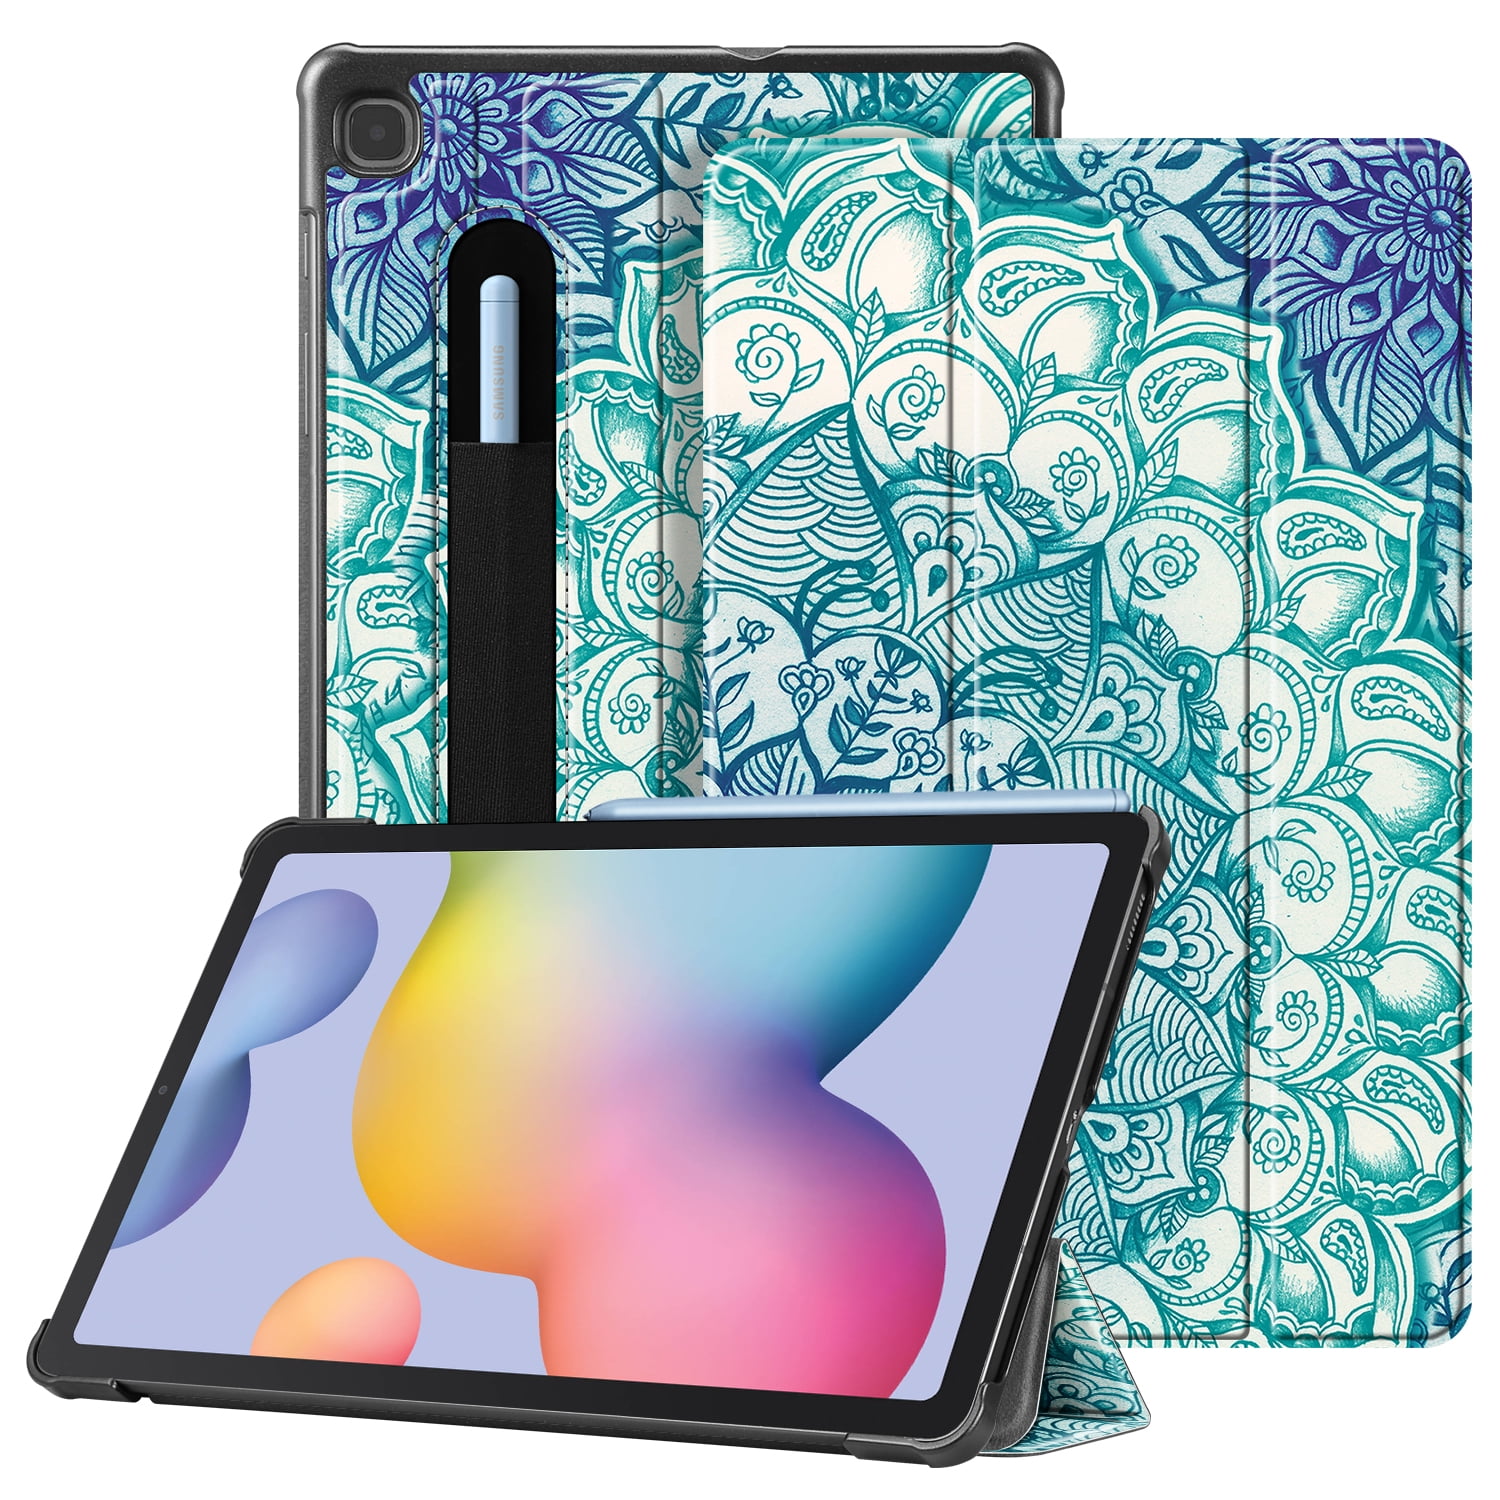 Fintie Slim Case for Samsung Galaxy Tab S6 Lite 10.4'' 2020 Model SMP610 (WiFi) SMP615 (LTE